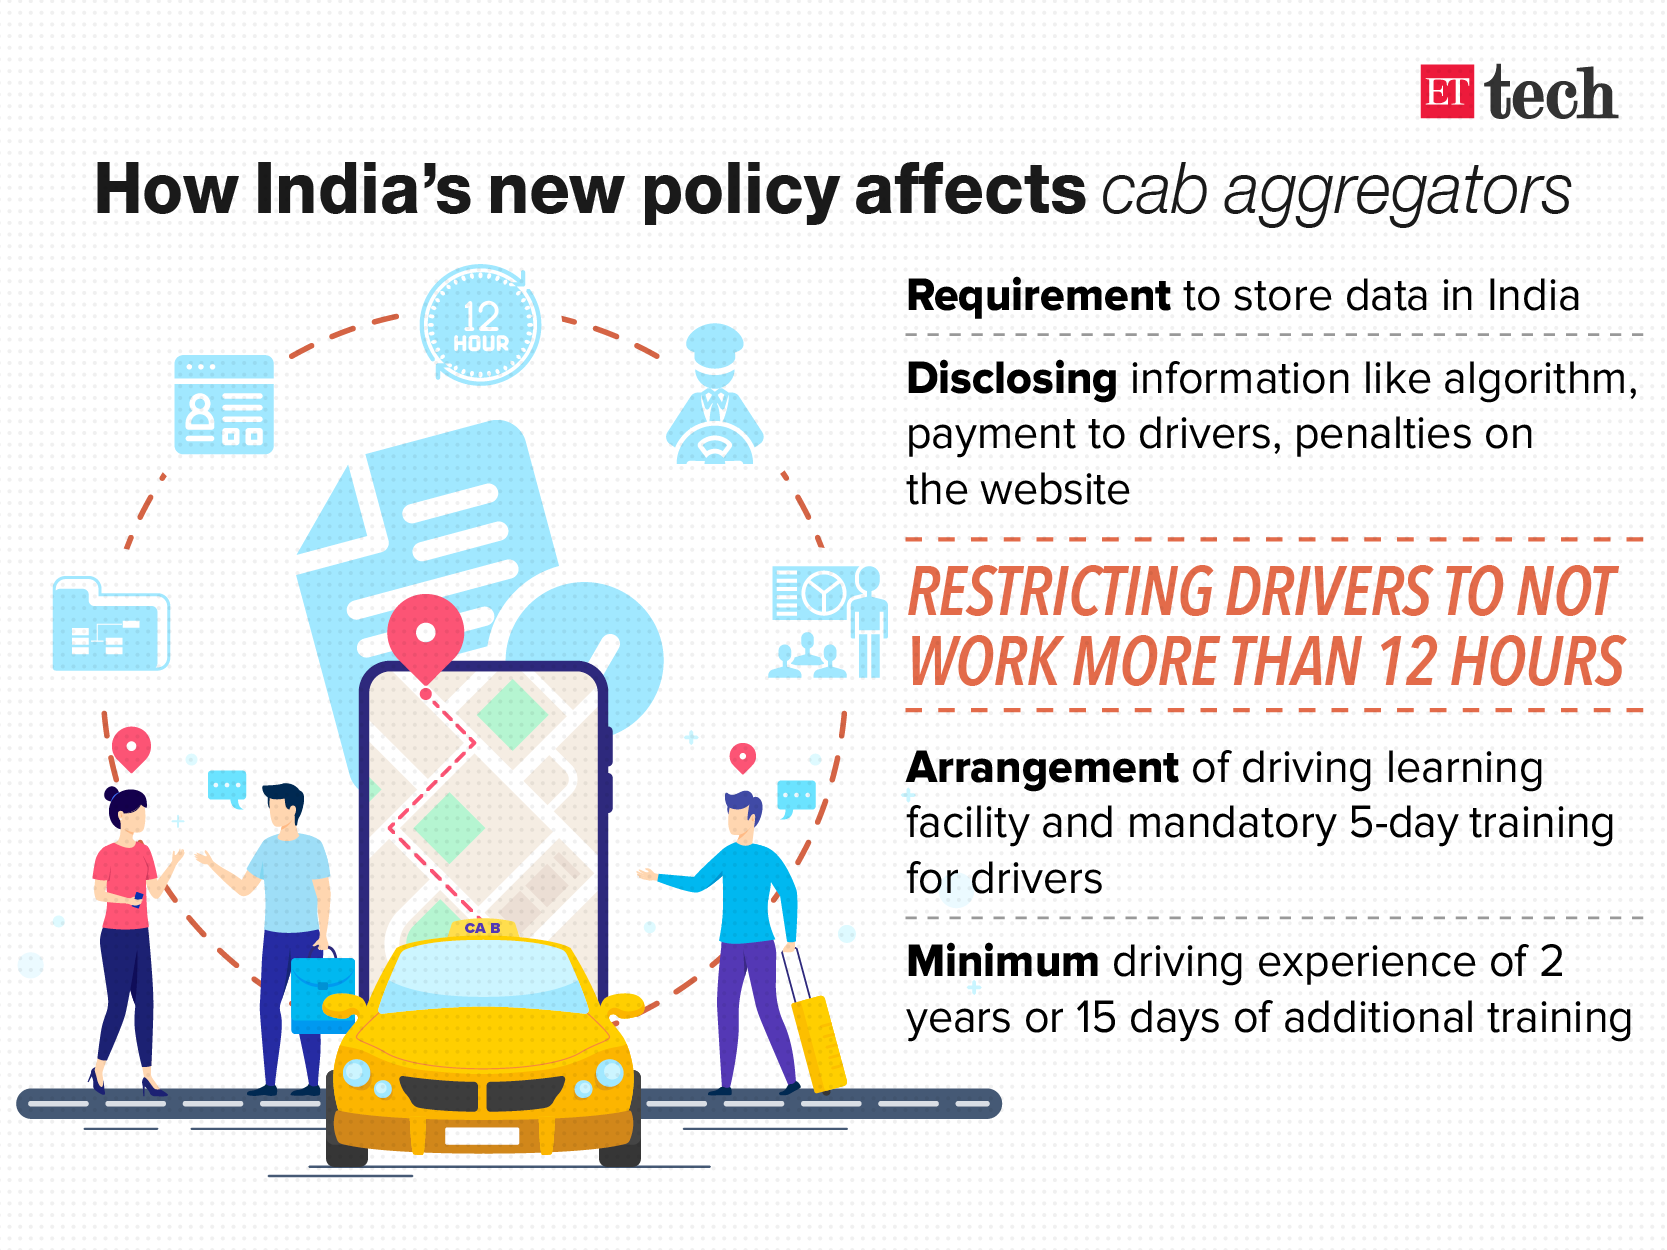 New govt rules may narrow earnings of ride-hailing firms like Uber, Ola